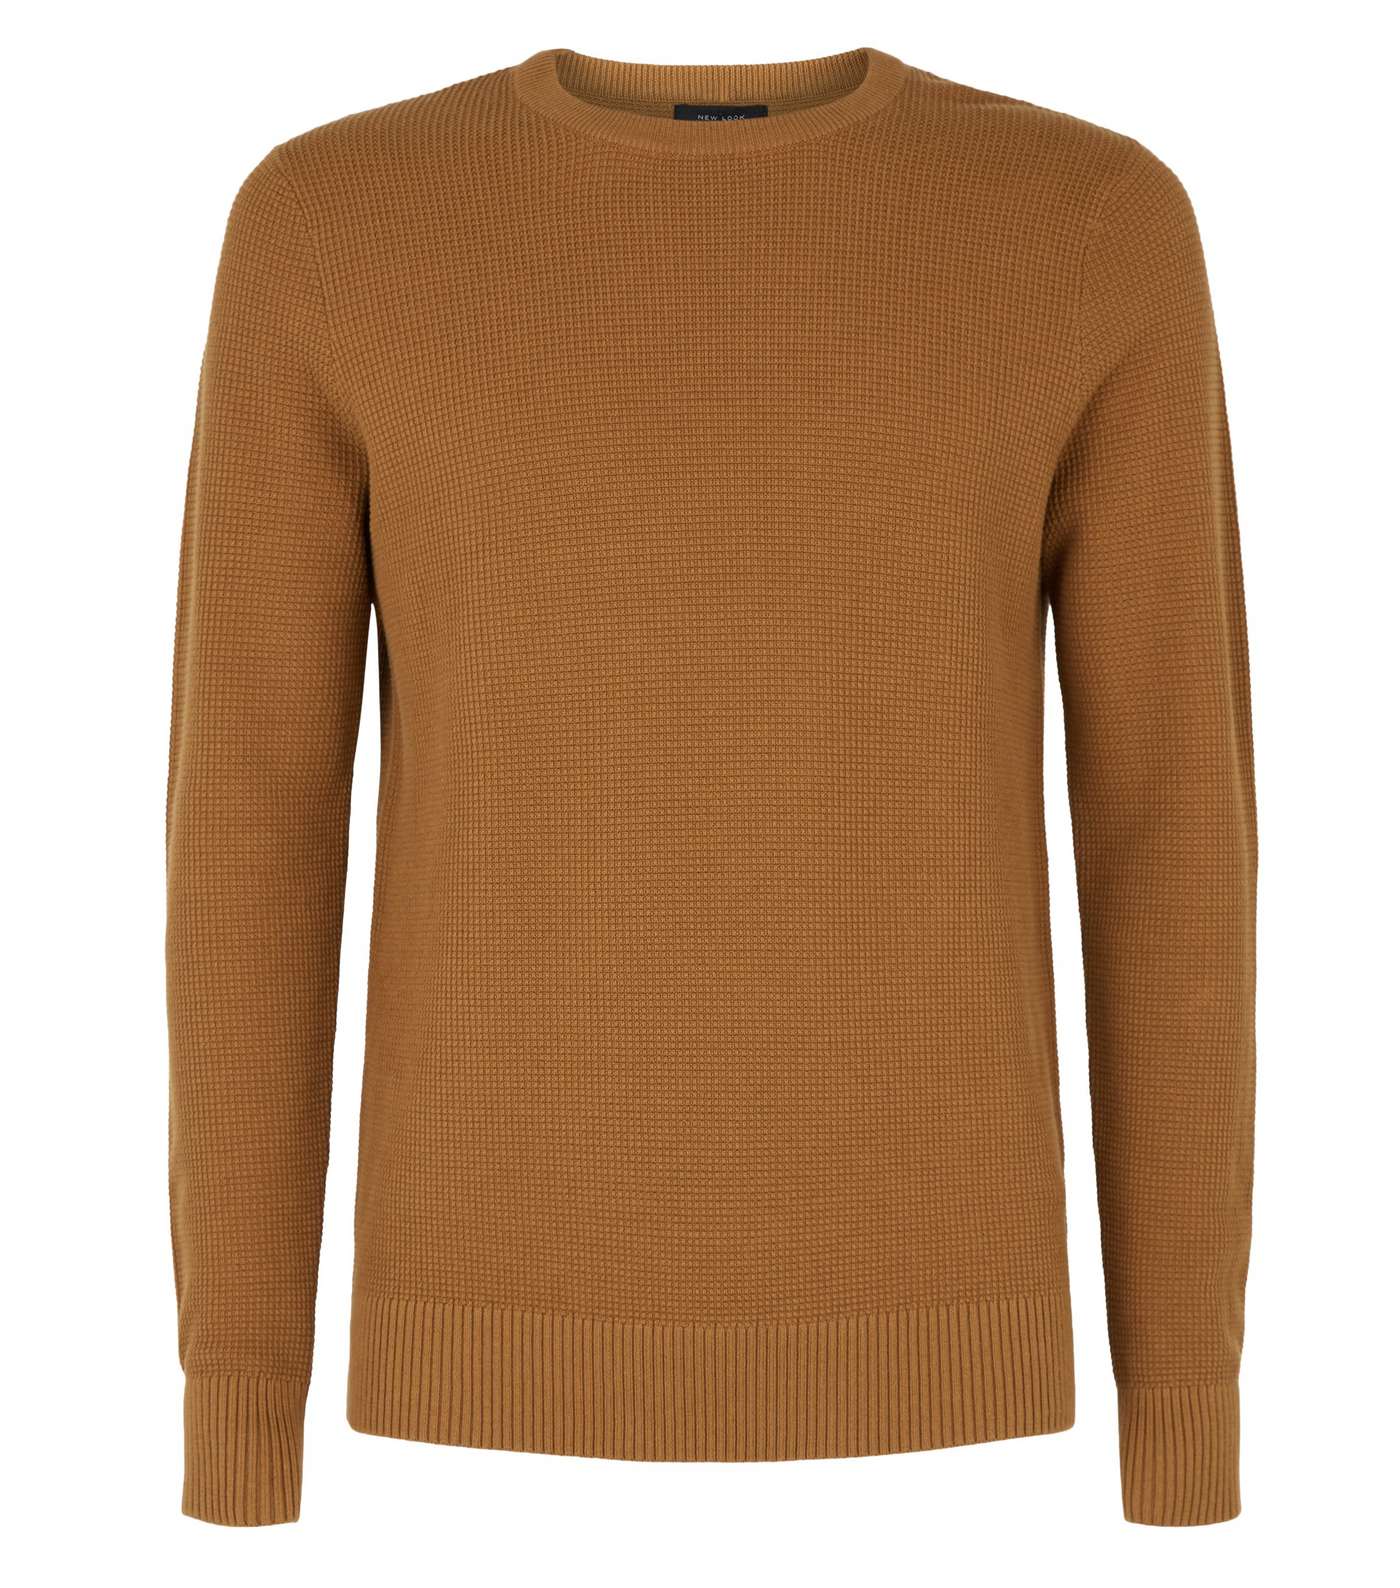 Rust Waffle Knit Muscle Fit Jumper Image 4